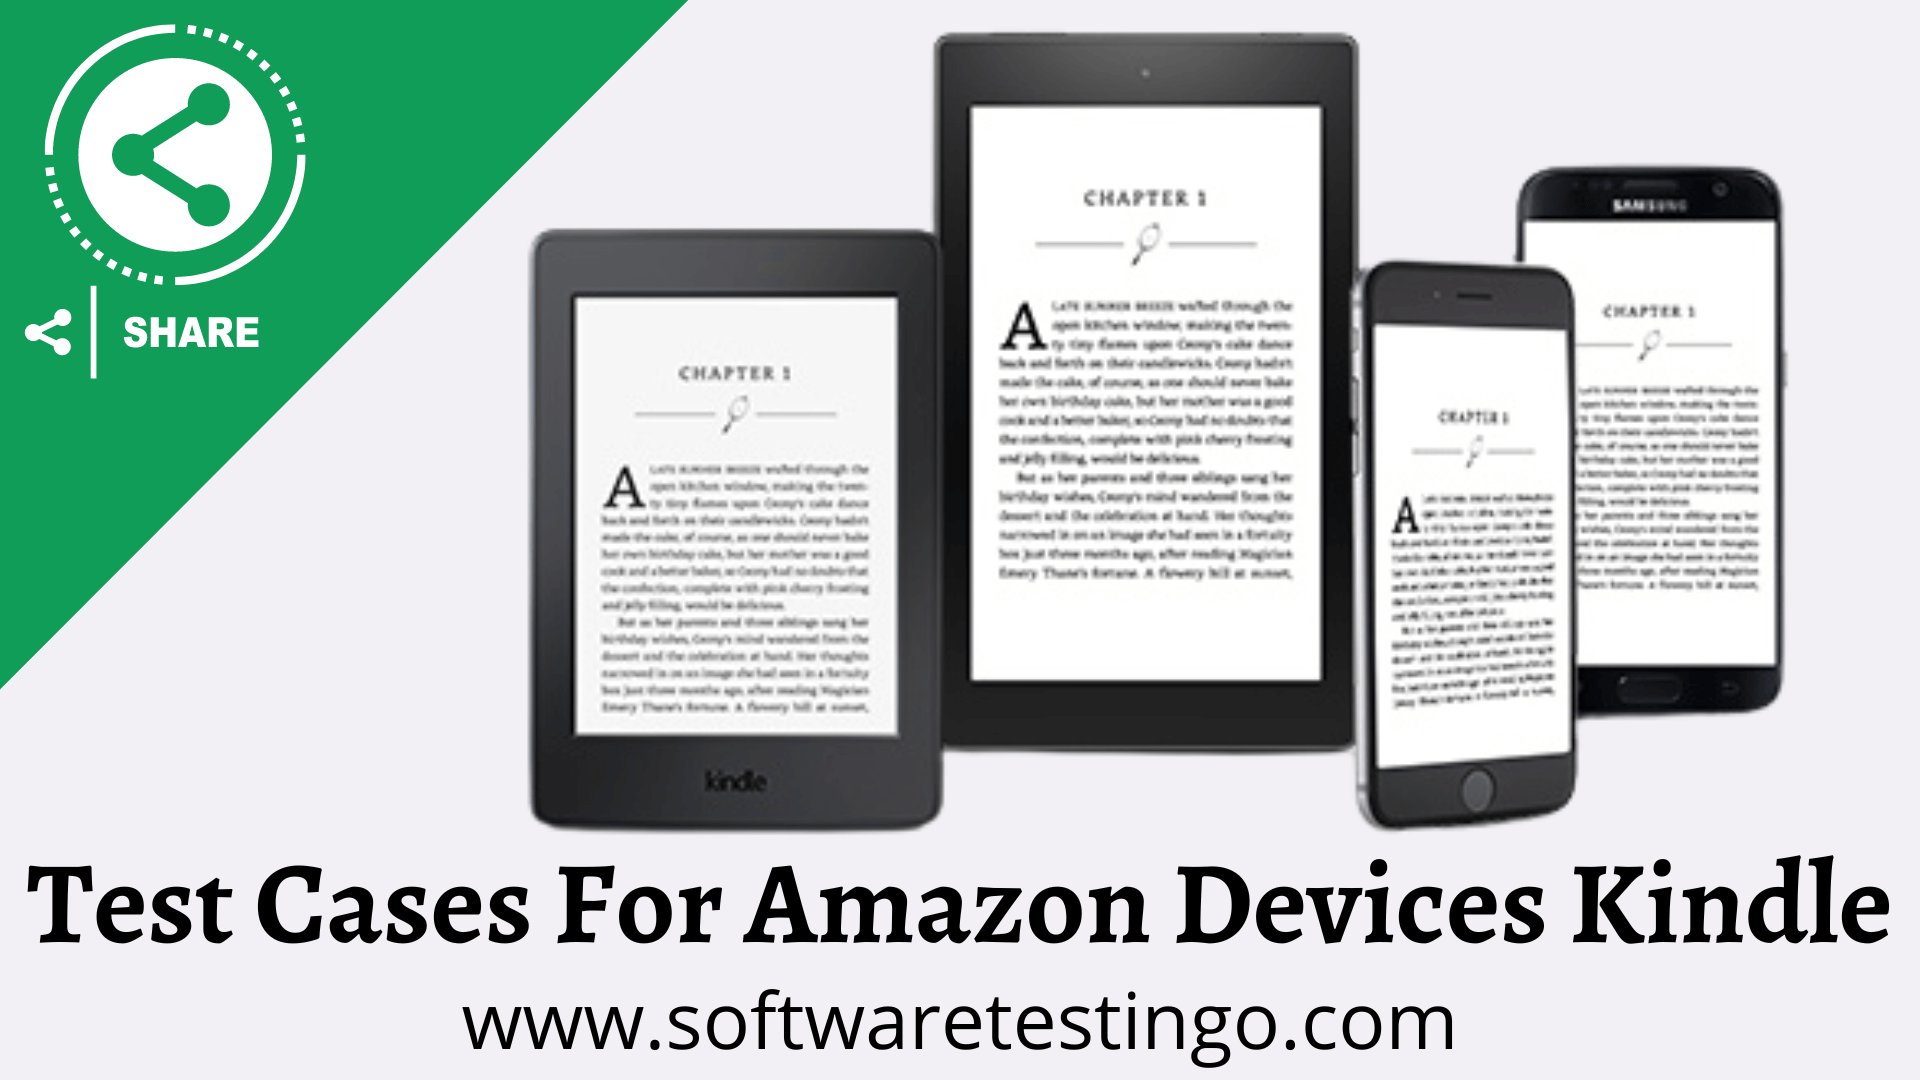 Test Cases For Amazon Devices Kindle